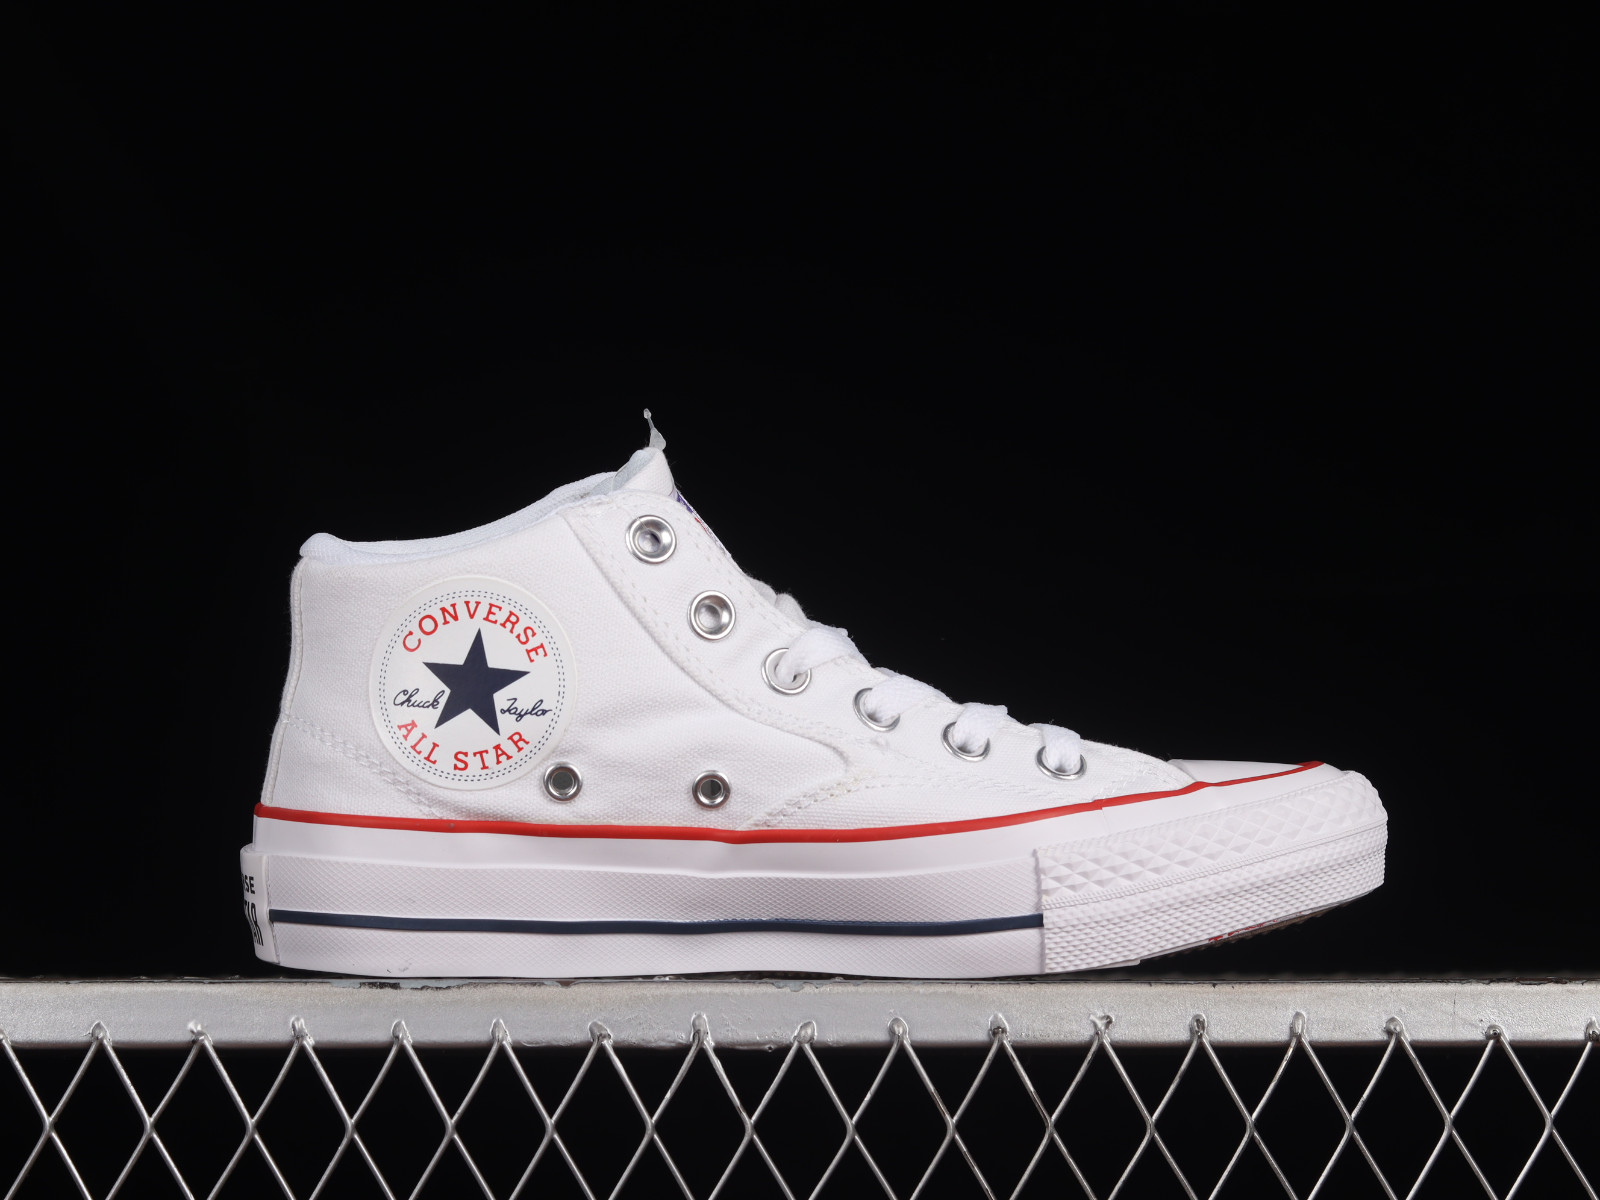 kande Skubbe tiger Converse Chuck Taylor All Star Malden Street White Red Blue A00812C -  GmarShops